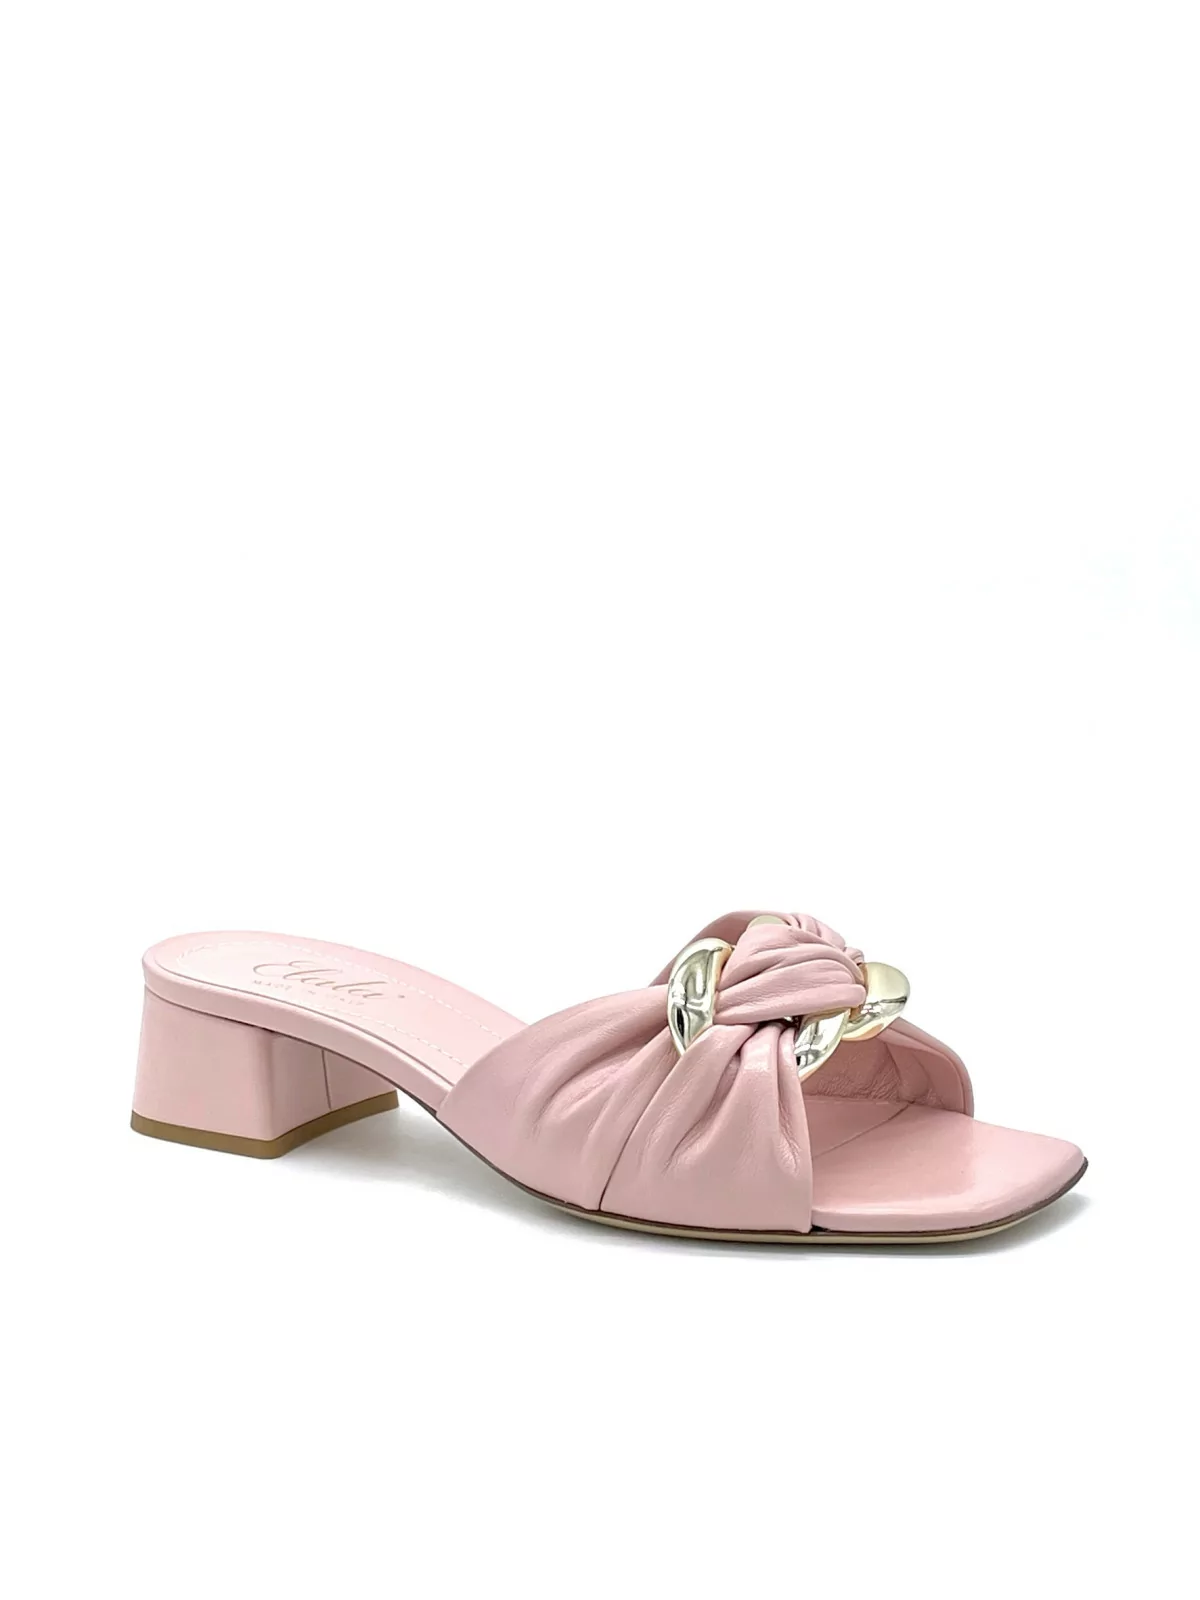 Pink leather mule with golden accessory. Leather lining. Leather sole. 3,5 cm he